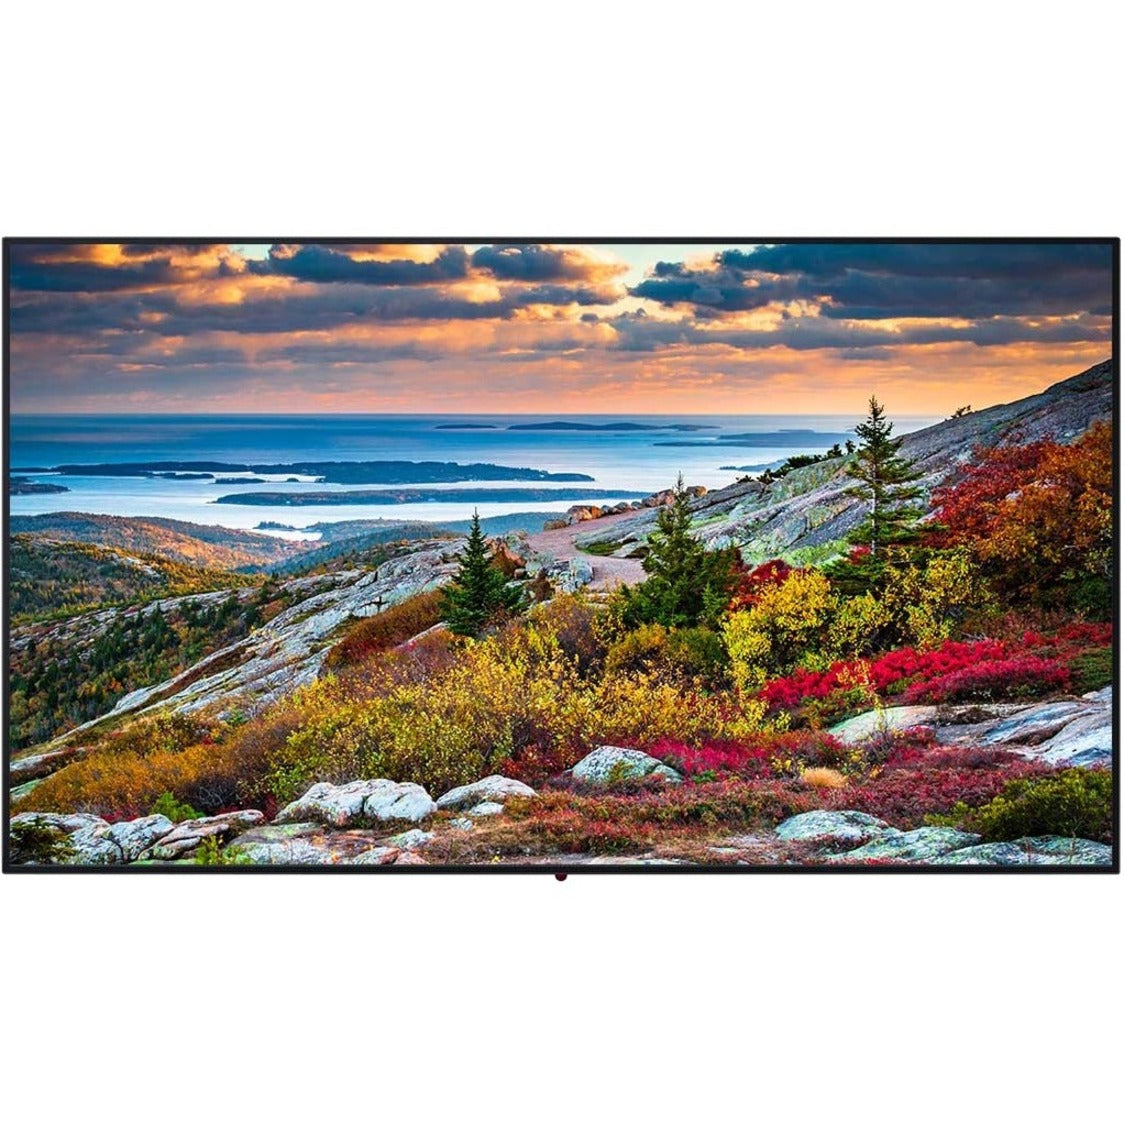 Panasonic 55" 4K LED TV - Stunning Picture Quality and Versatile Connectivity [Discontinued]